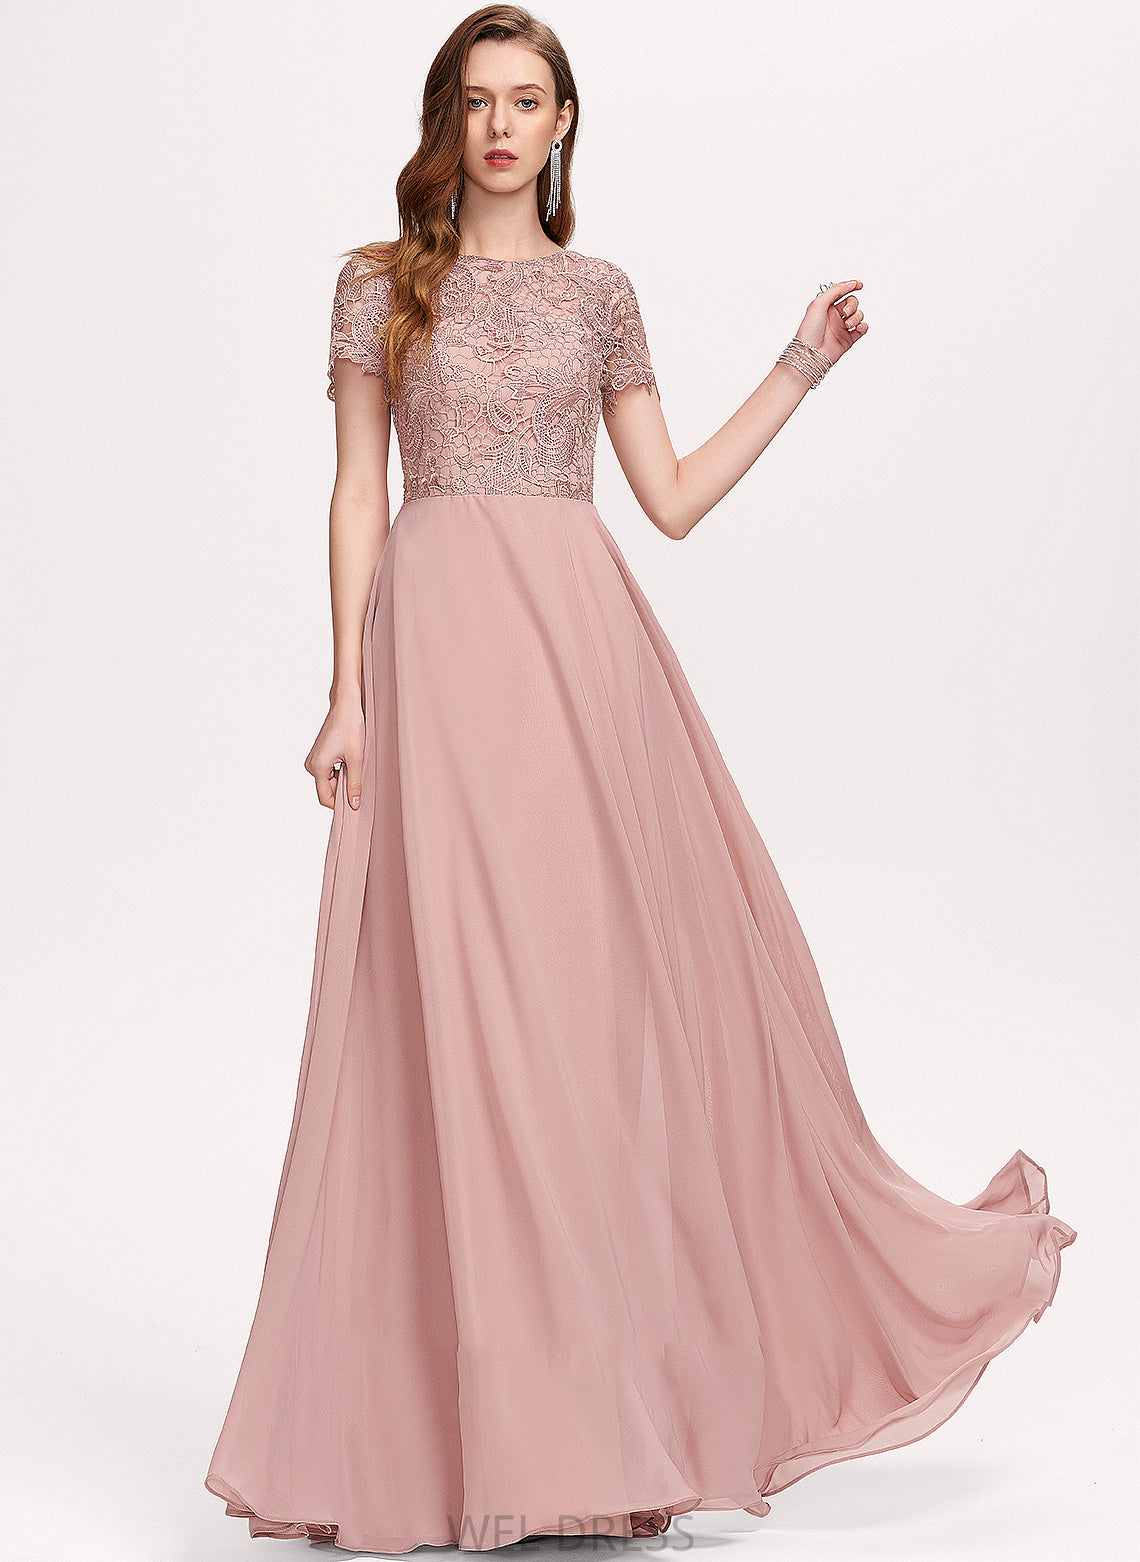 Scoop Sequins Floor-Length Prom Dresses With A-Line Chiffon Neck Hayley